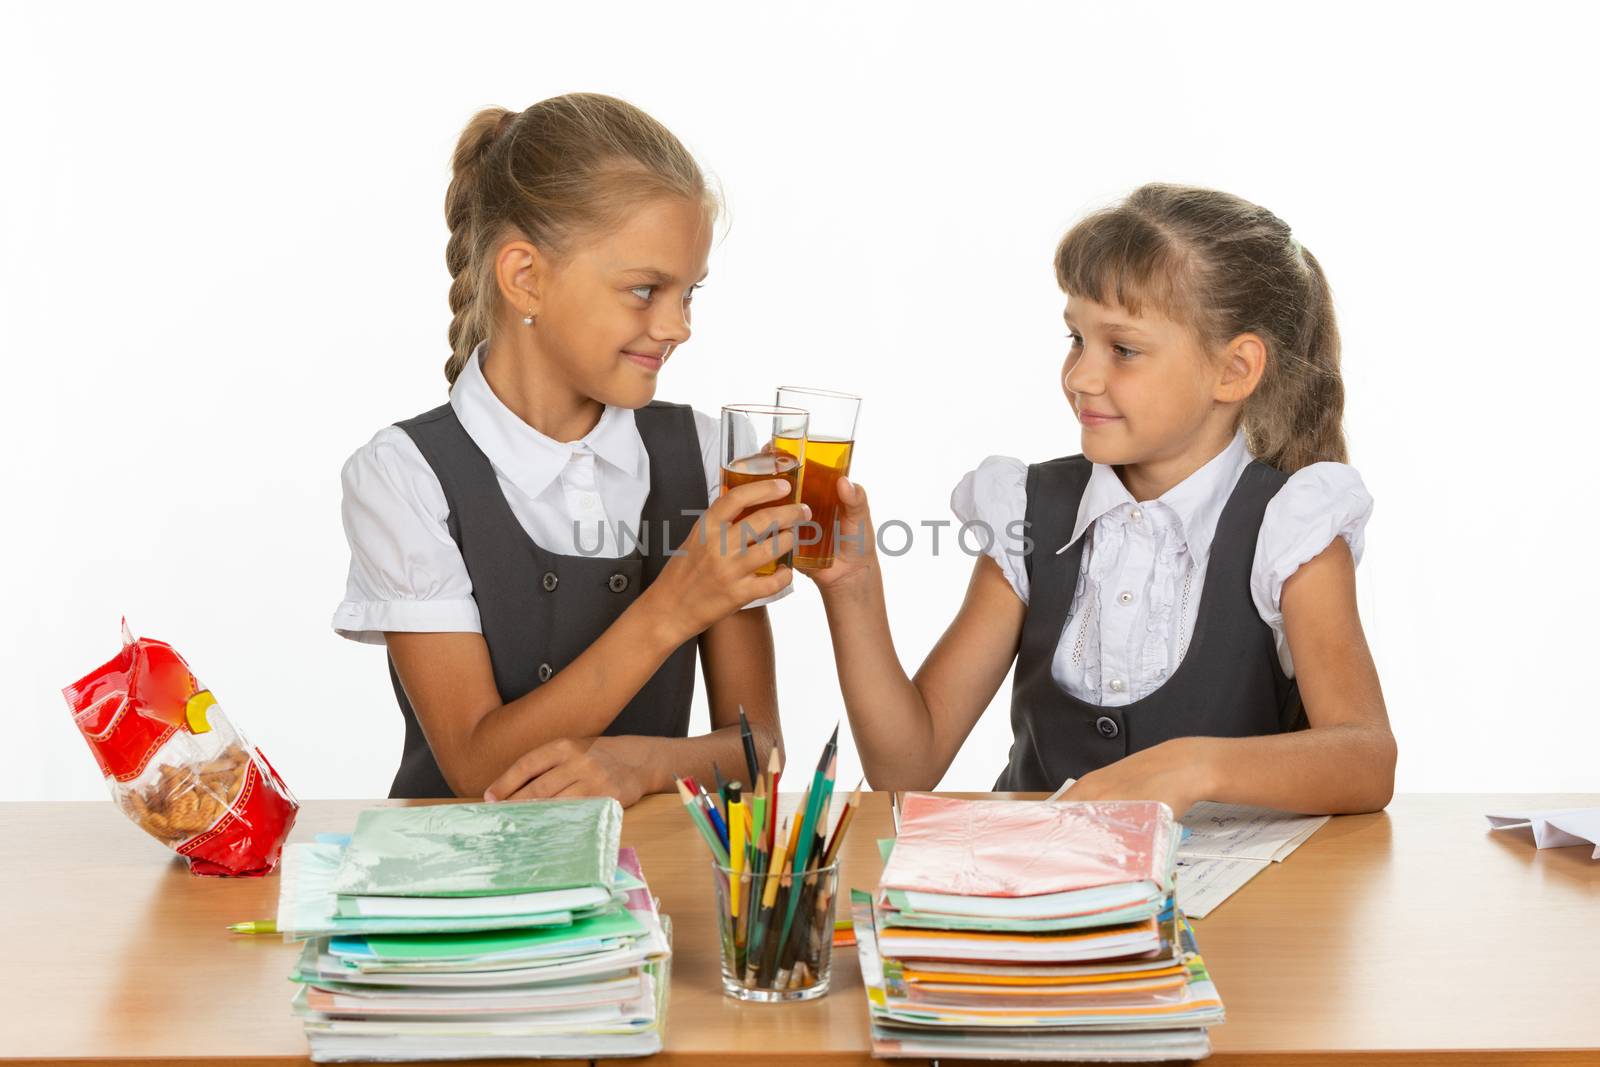 Two funny schoolgirls at a table drink juice, and banged glasses